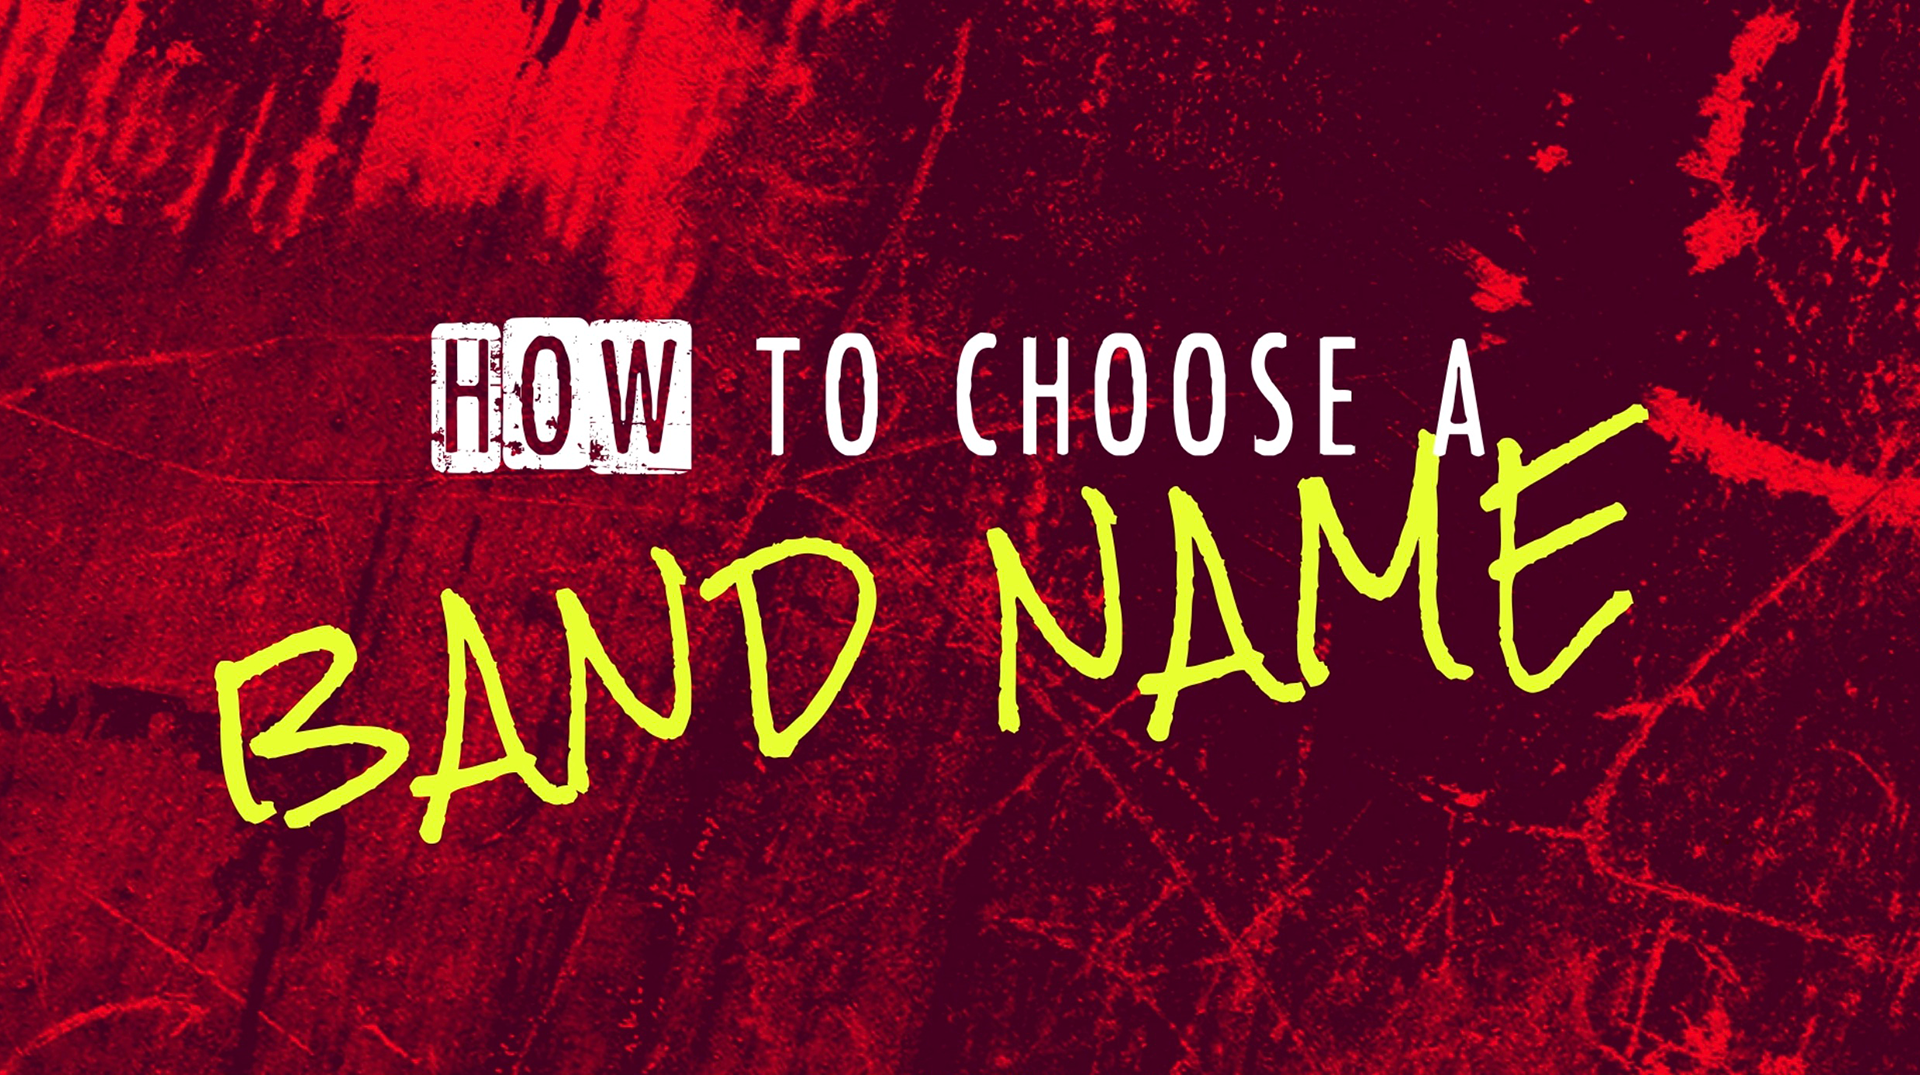 How to Choose a Band Name